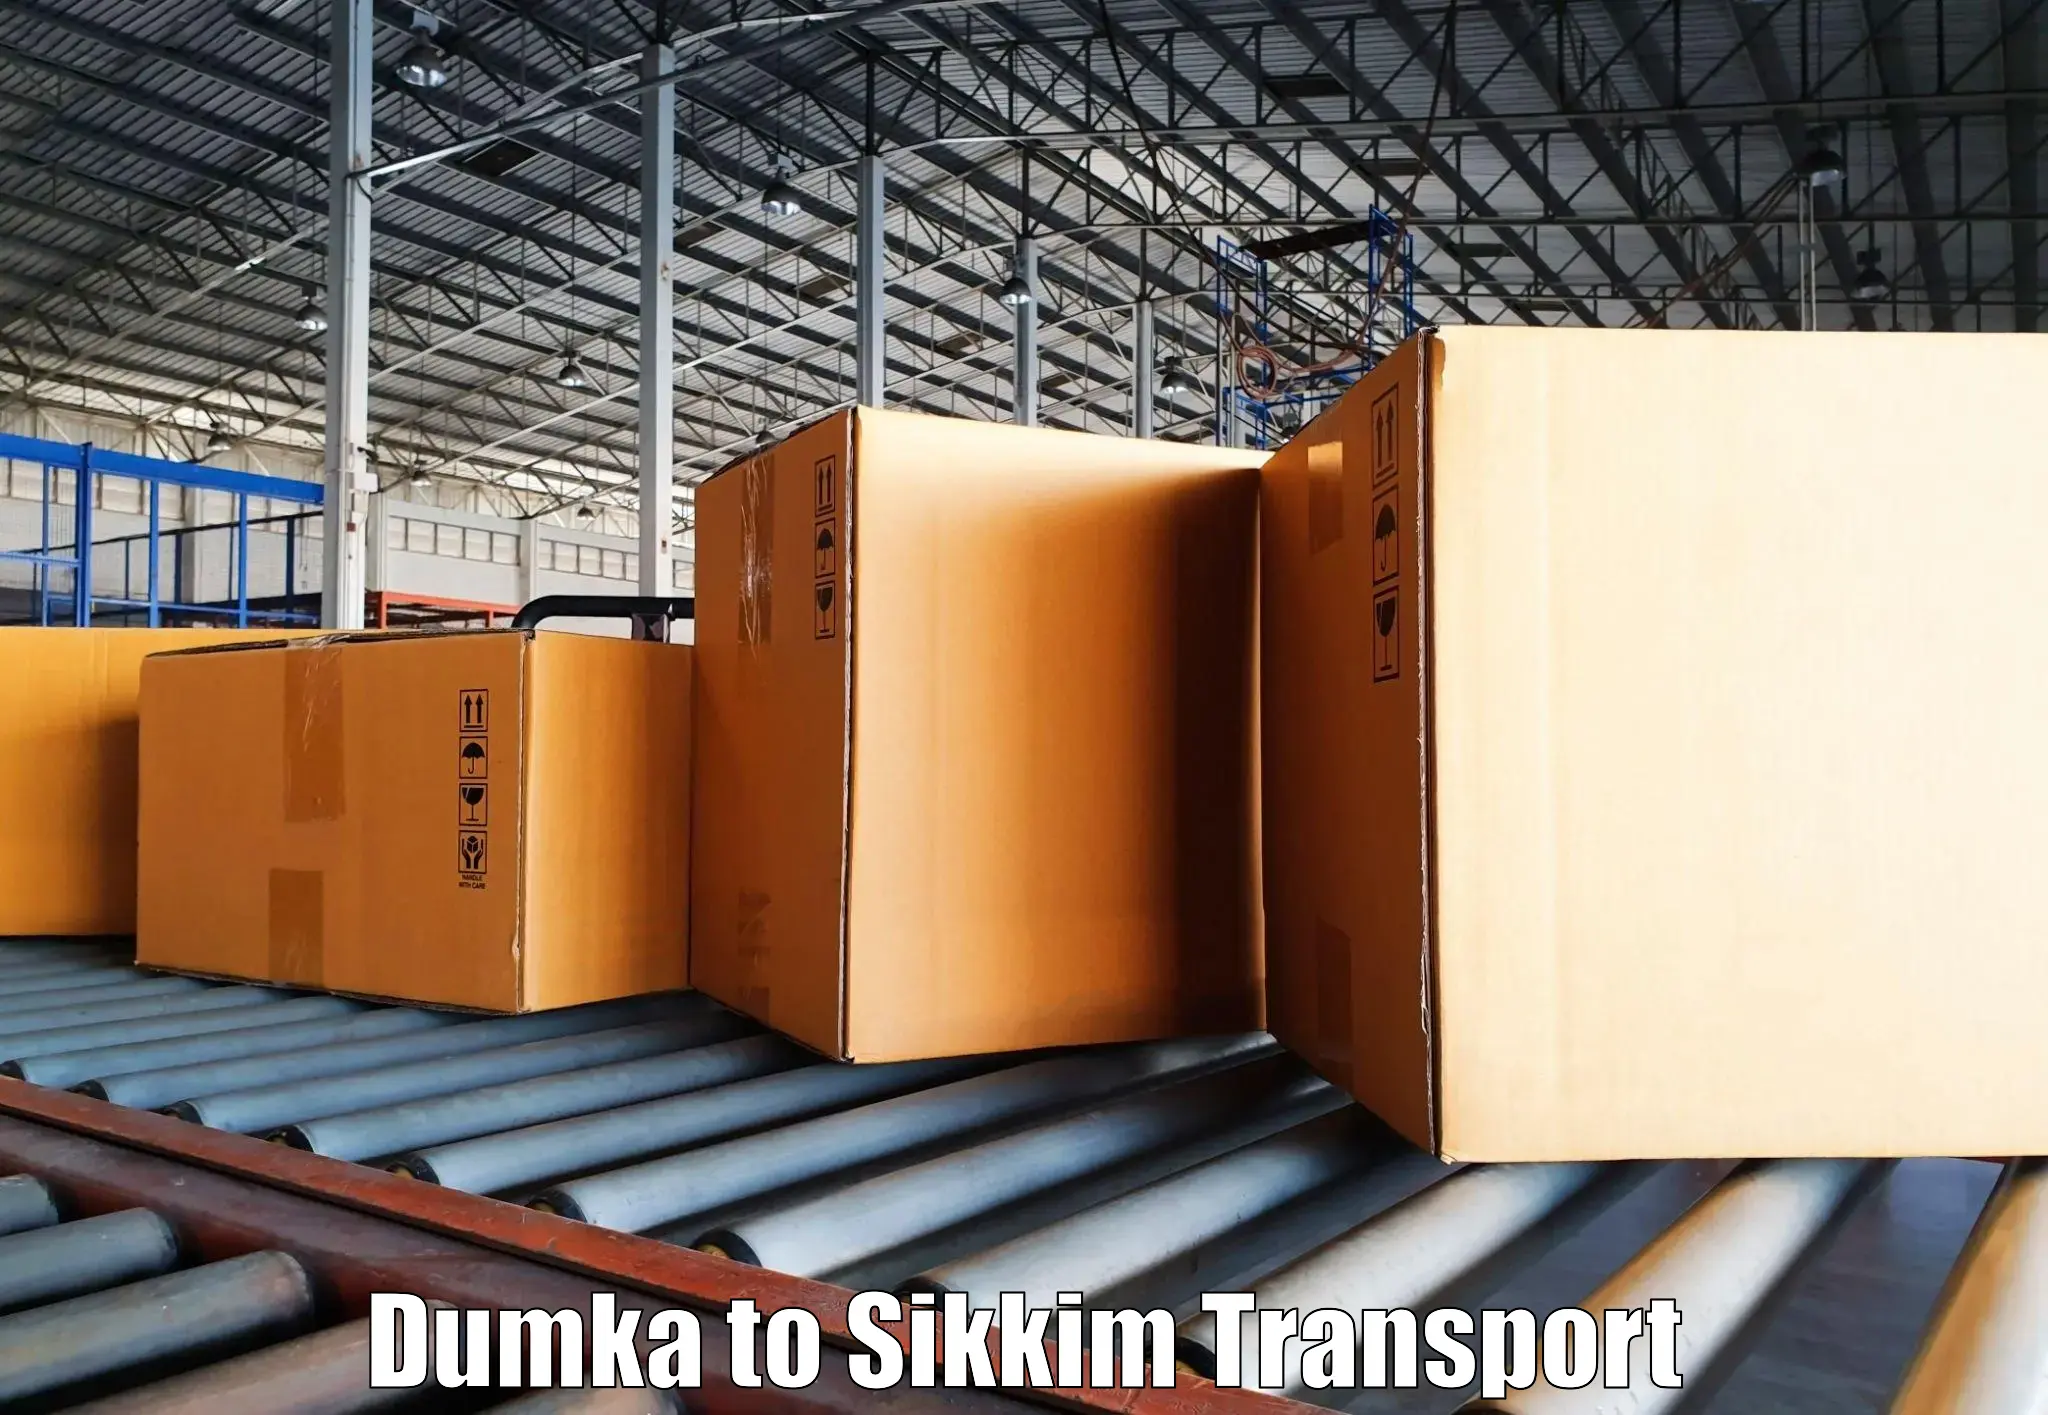 Nearby transport service Dumka to East Sikkim